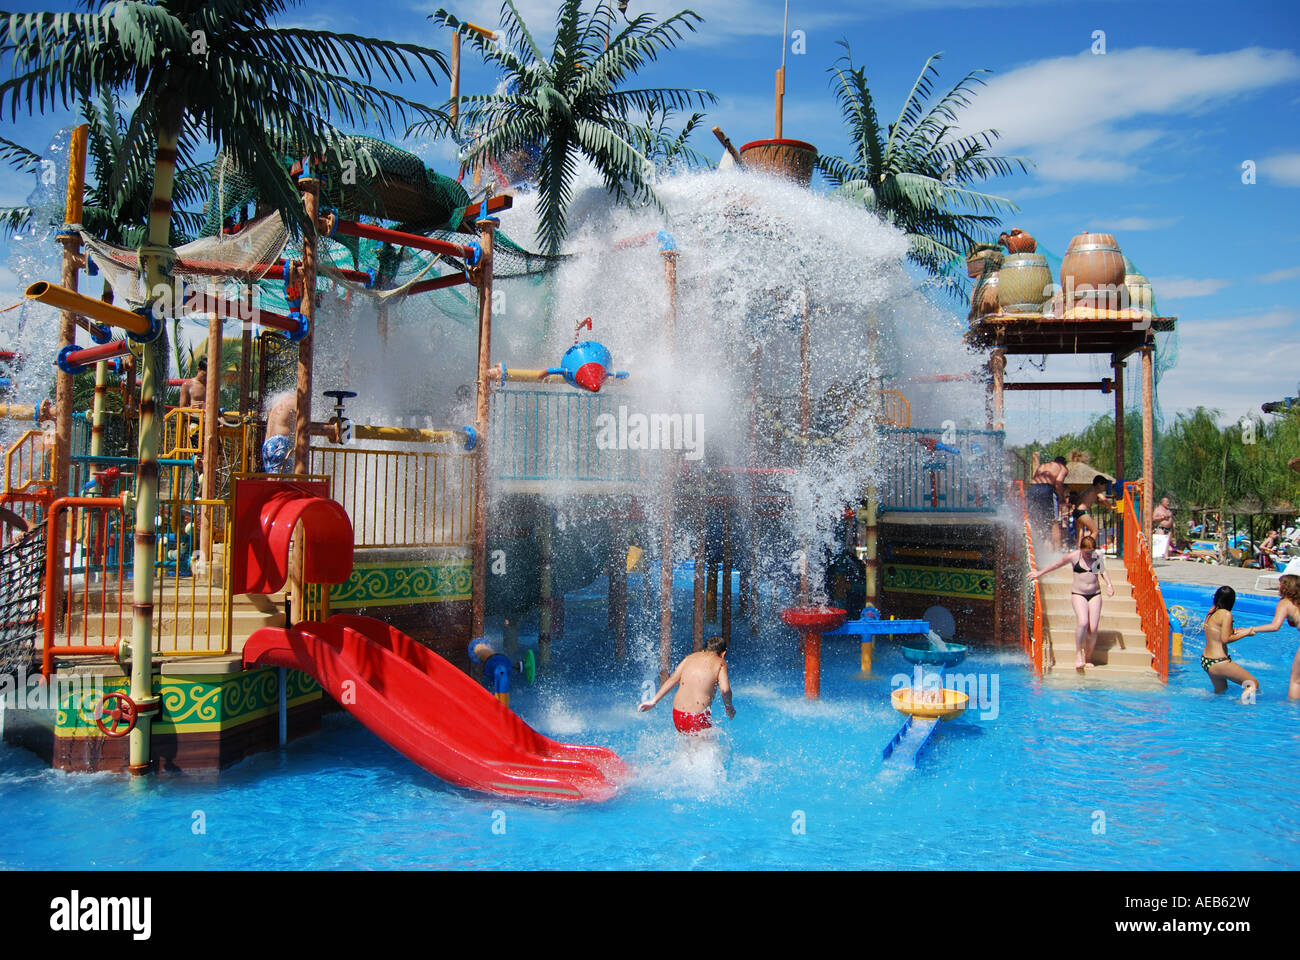 Water Slides Teenagers High Resolution Stock Photography and Images - Alamy